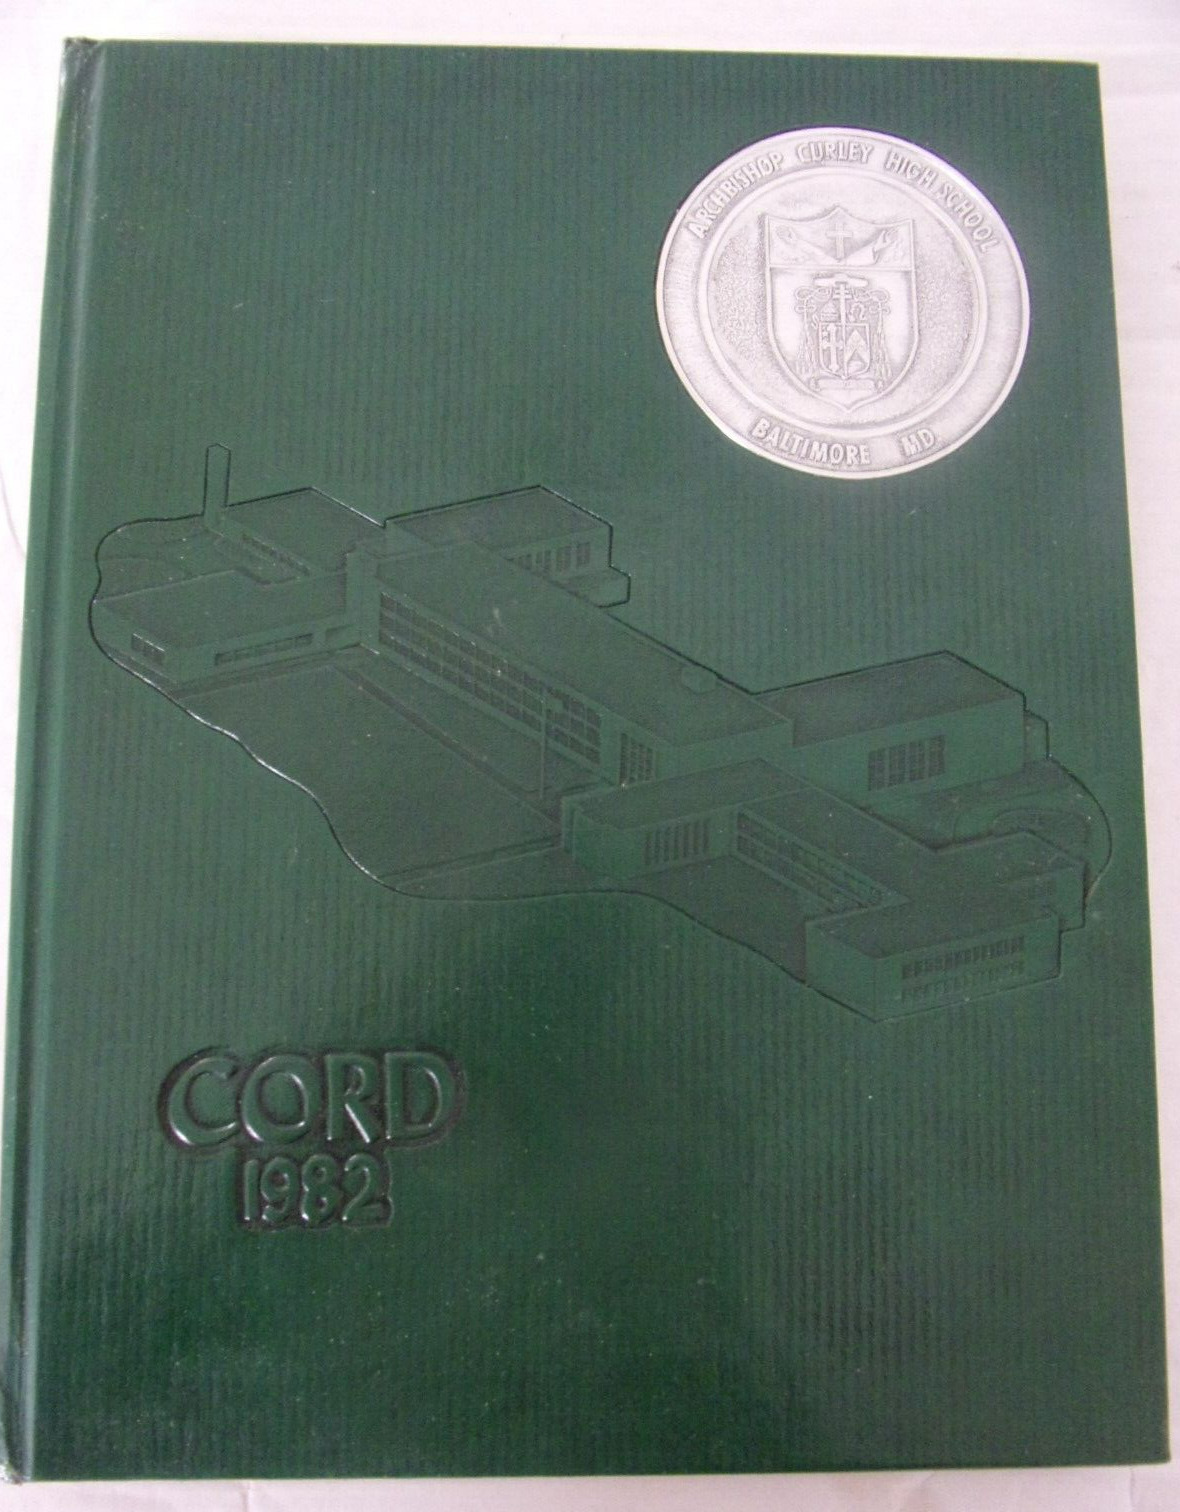 Yearbook - Archbishop Curley 1982  - The Cord